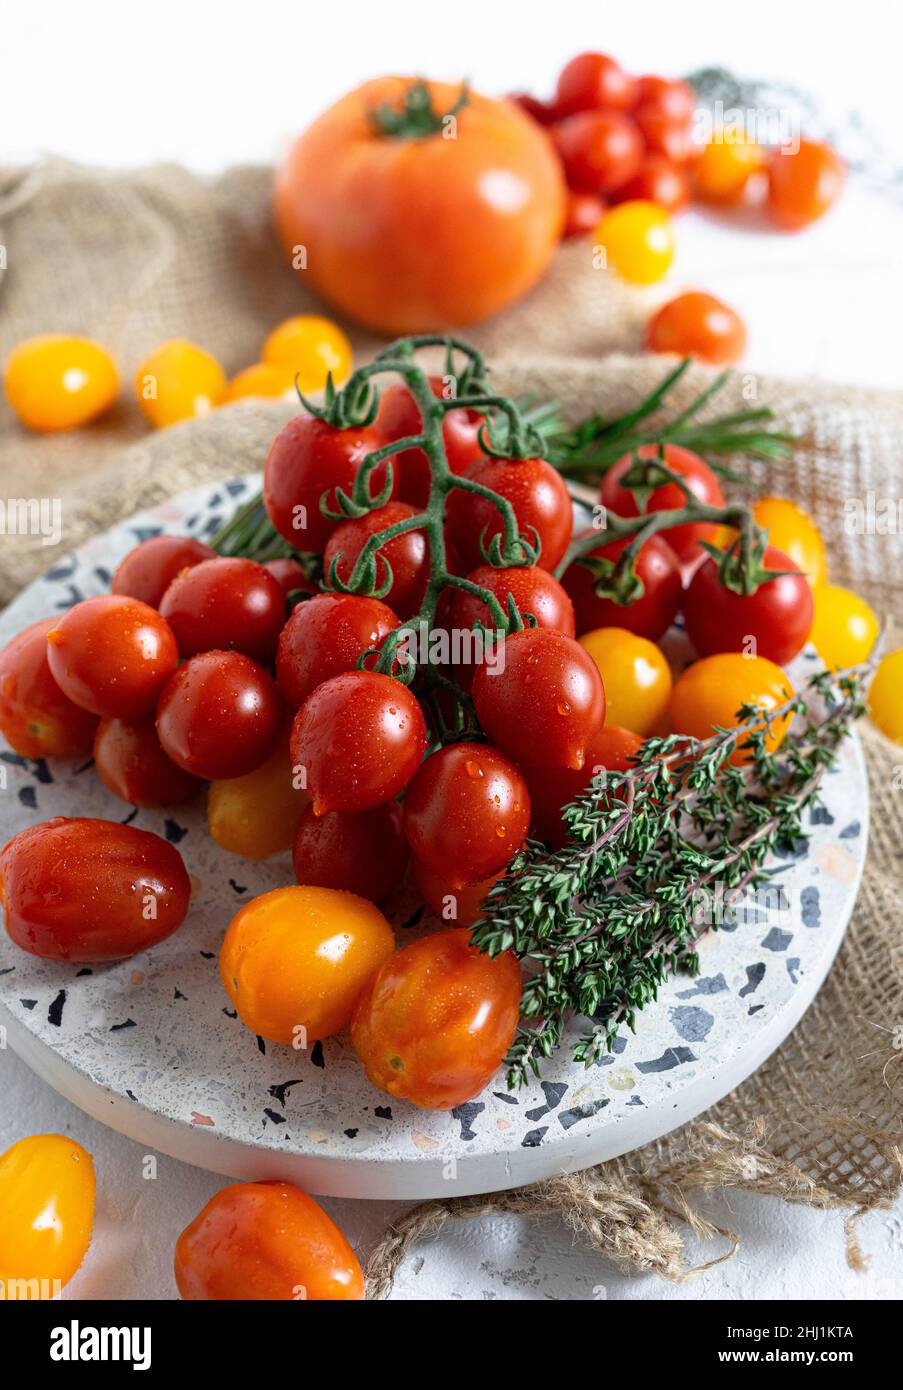 Different kinds of ripe tomatoes with thyme and rosemary Stock Photo